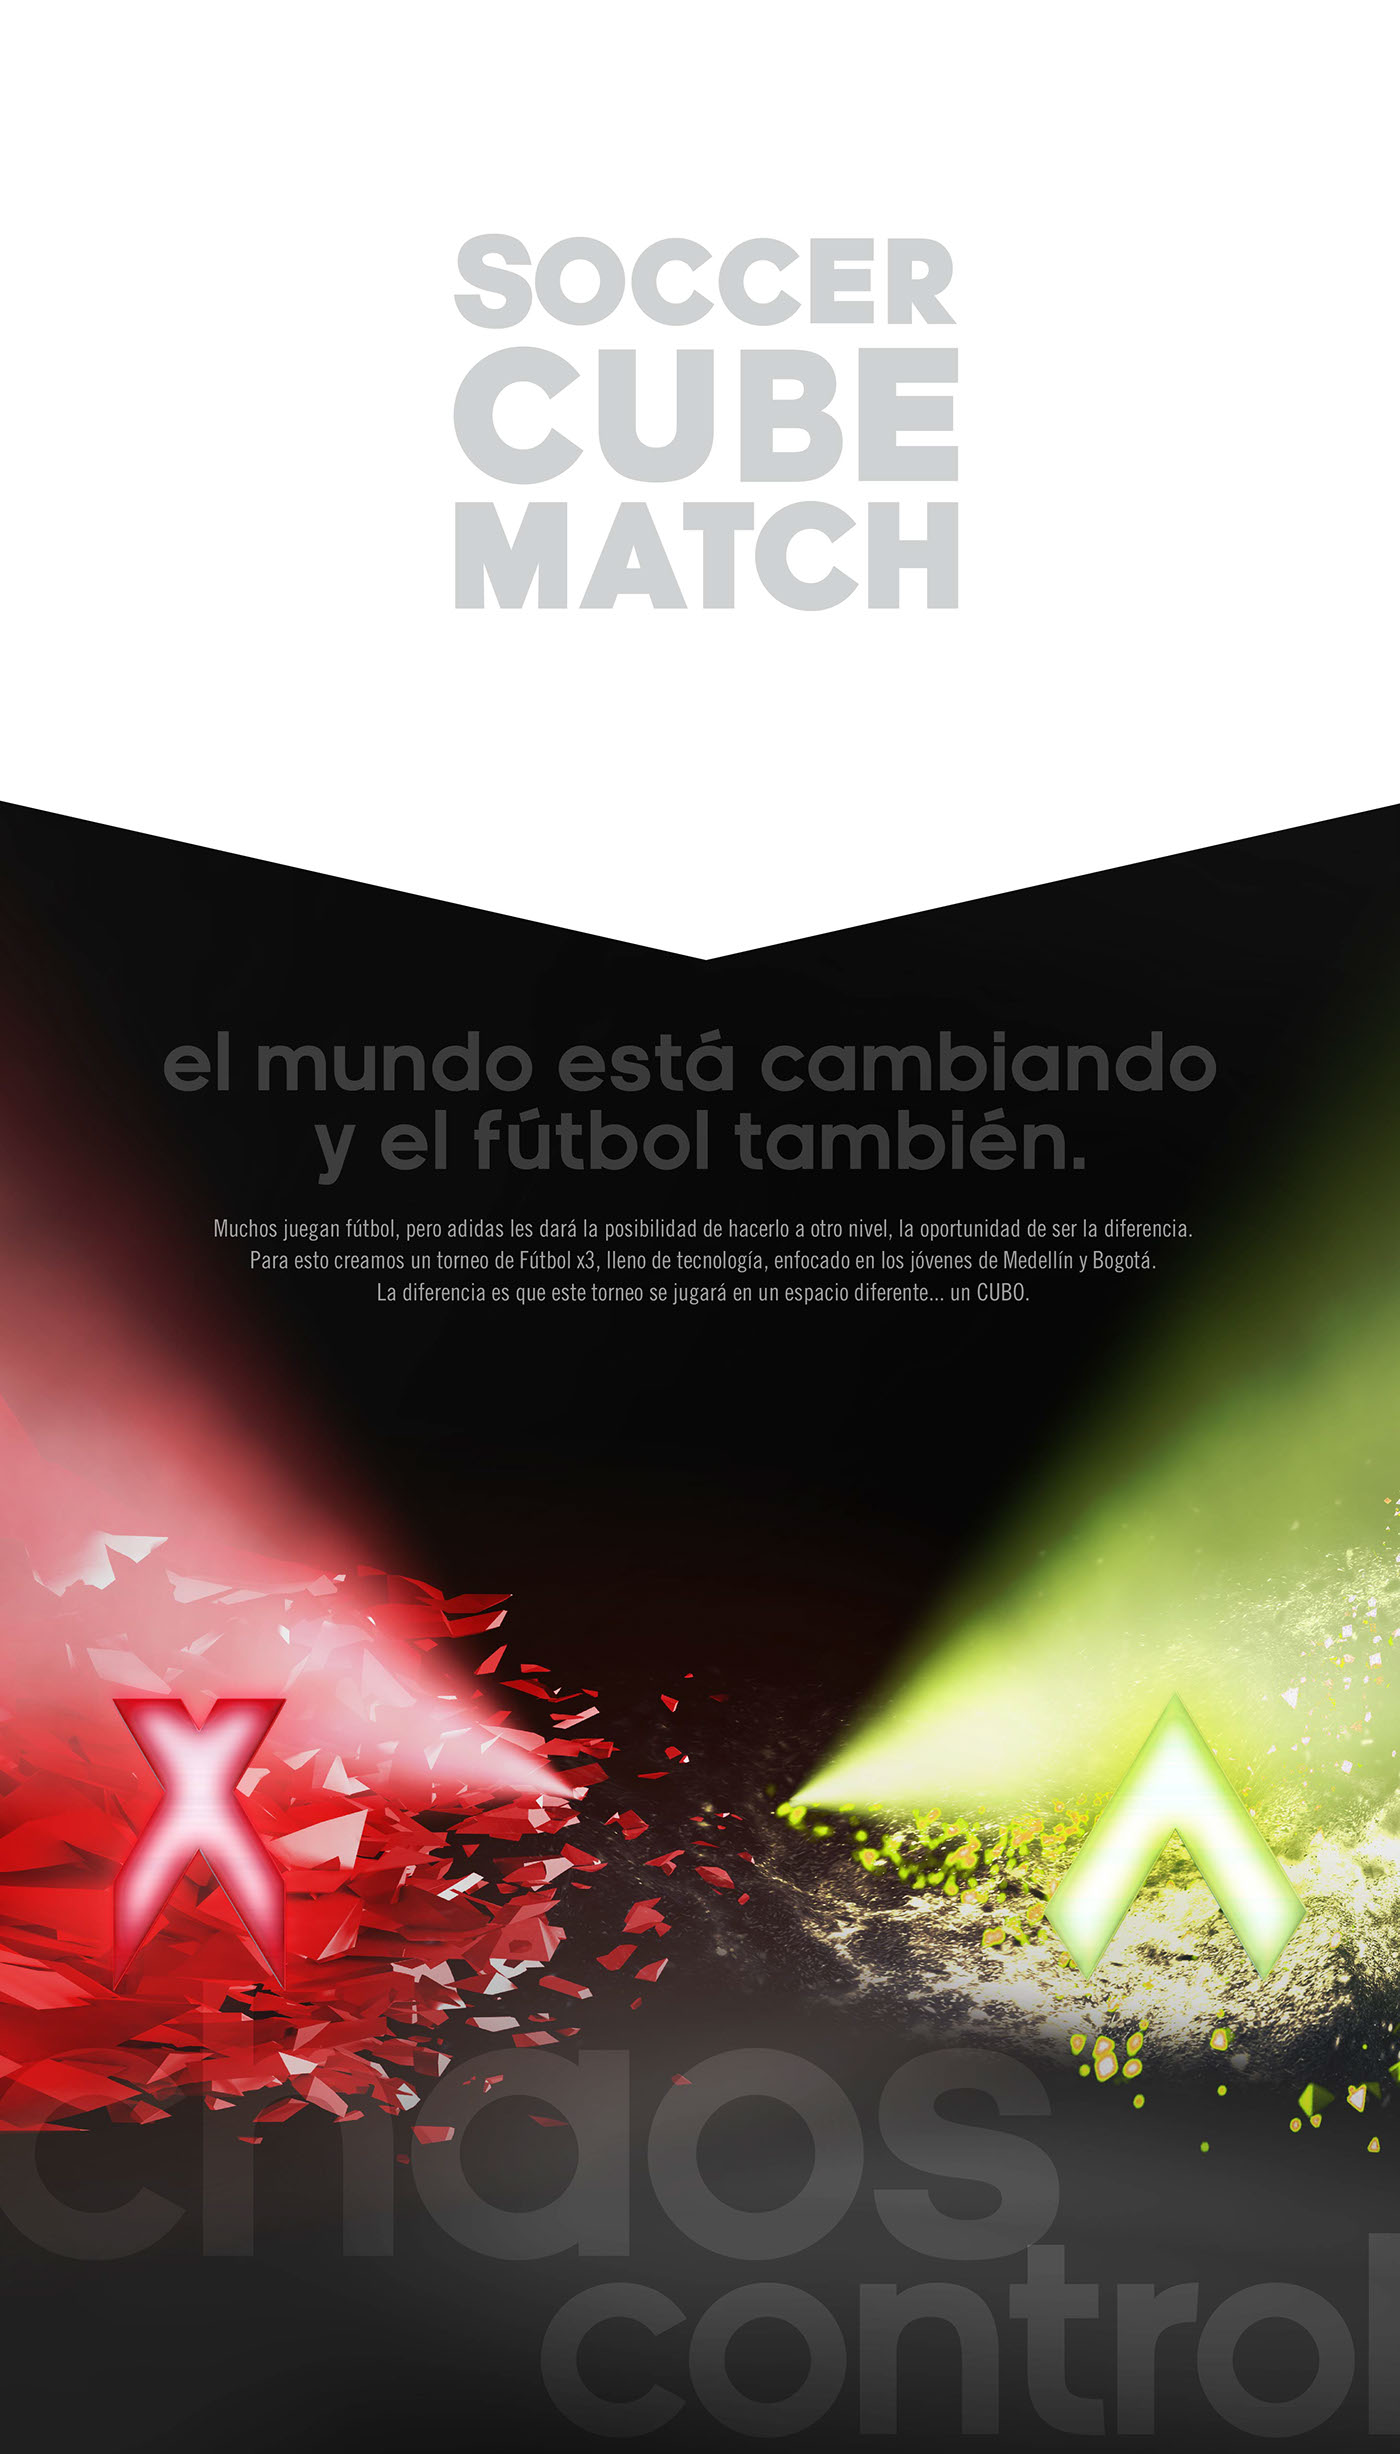 soccer cube match adidas colombia Competition football Futbol cubo Technology interactive